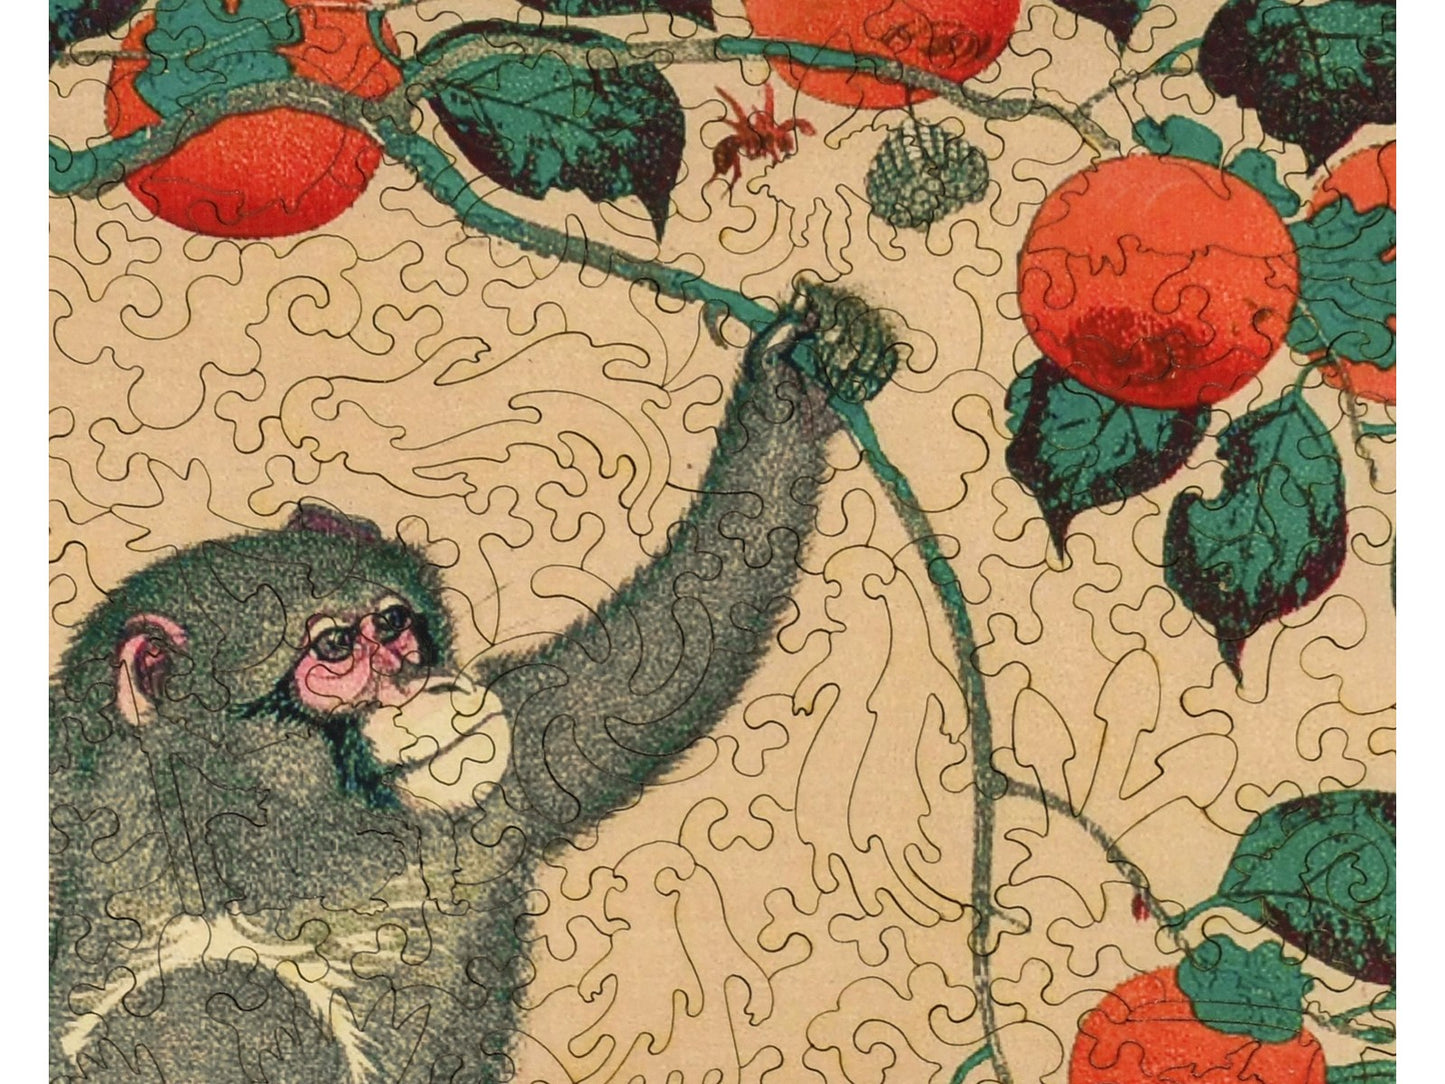 A closeup of the front of the puzzle, Monkey in Persimmon Tree, showing the detail in the pieces.